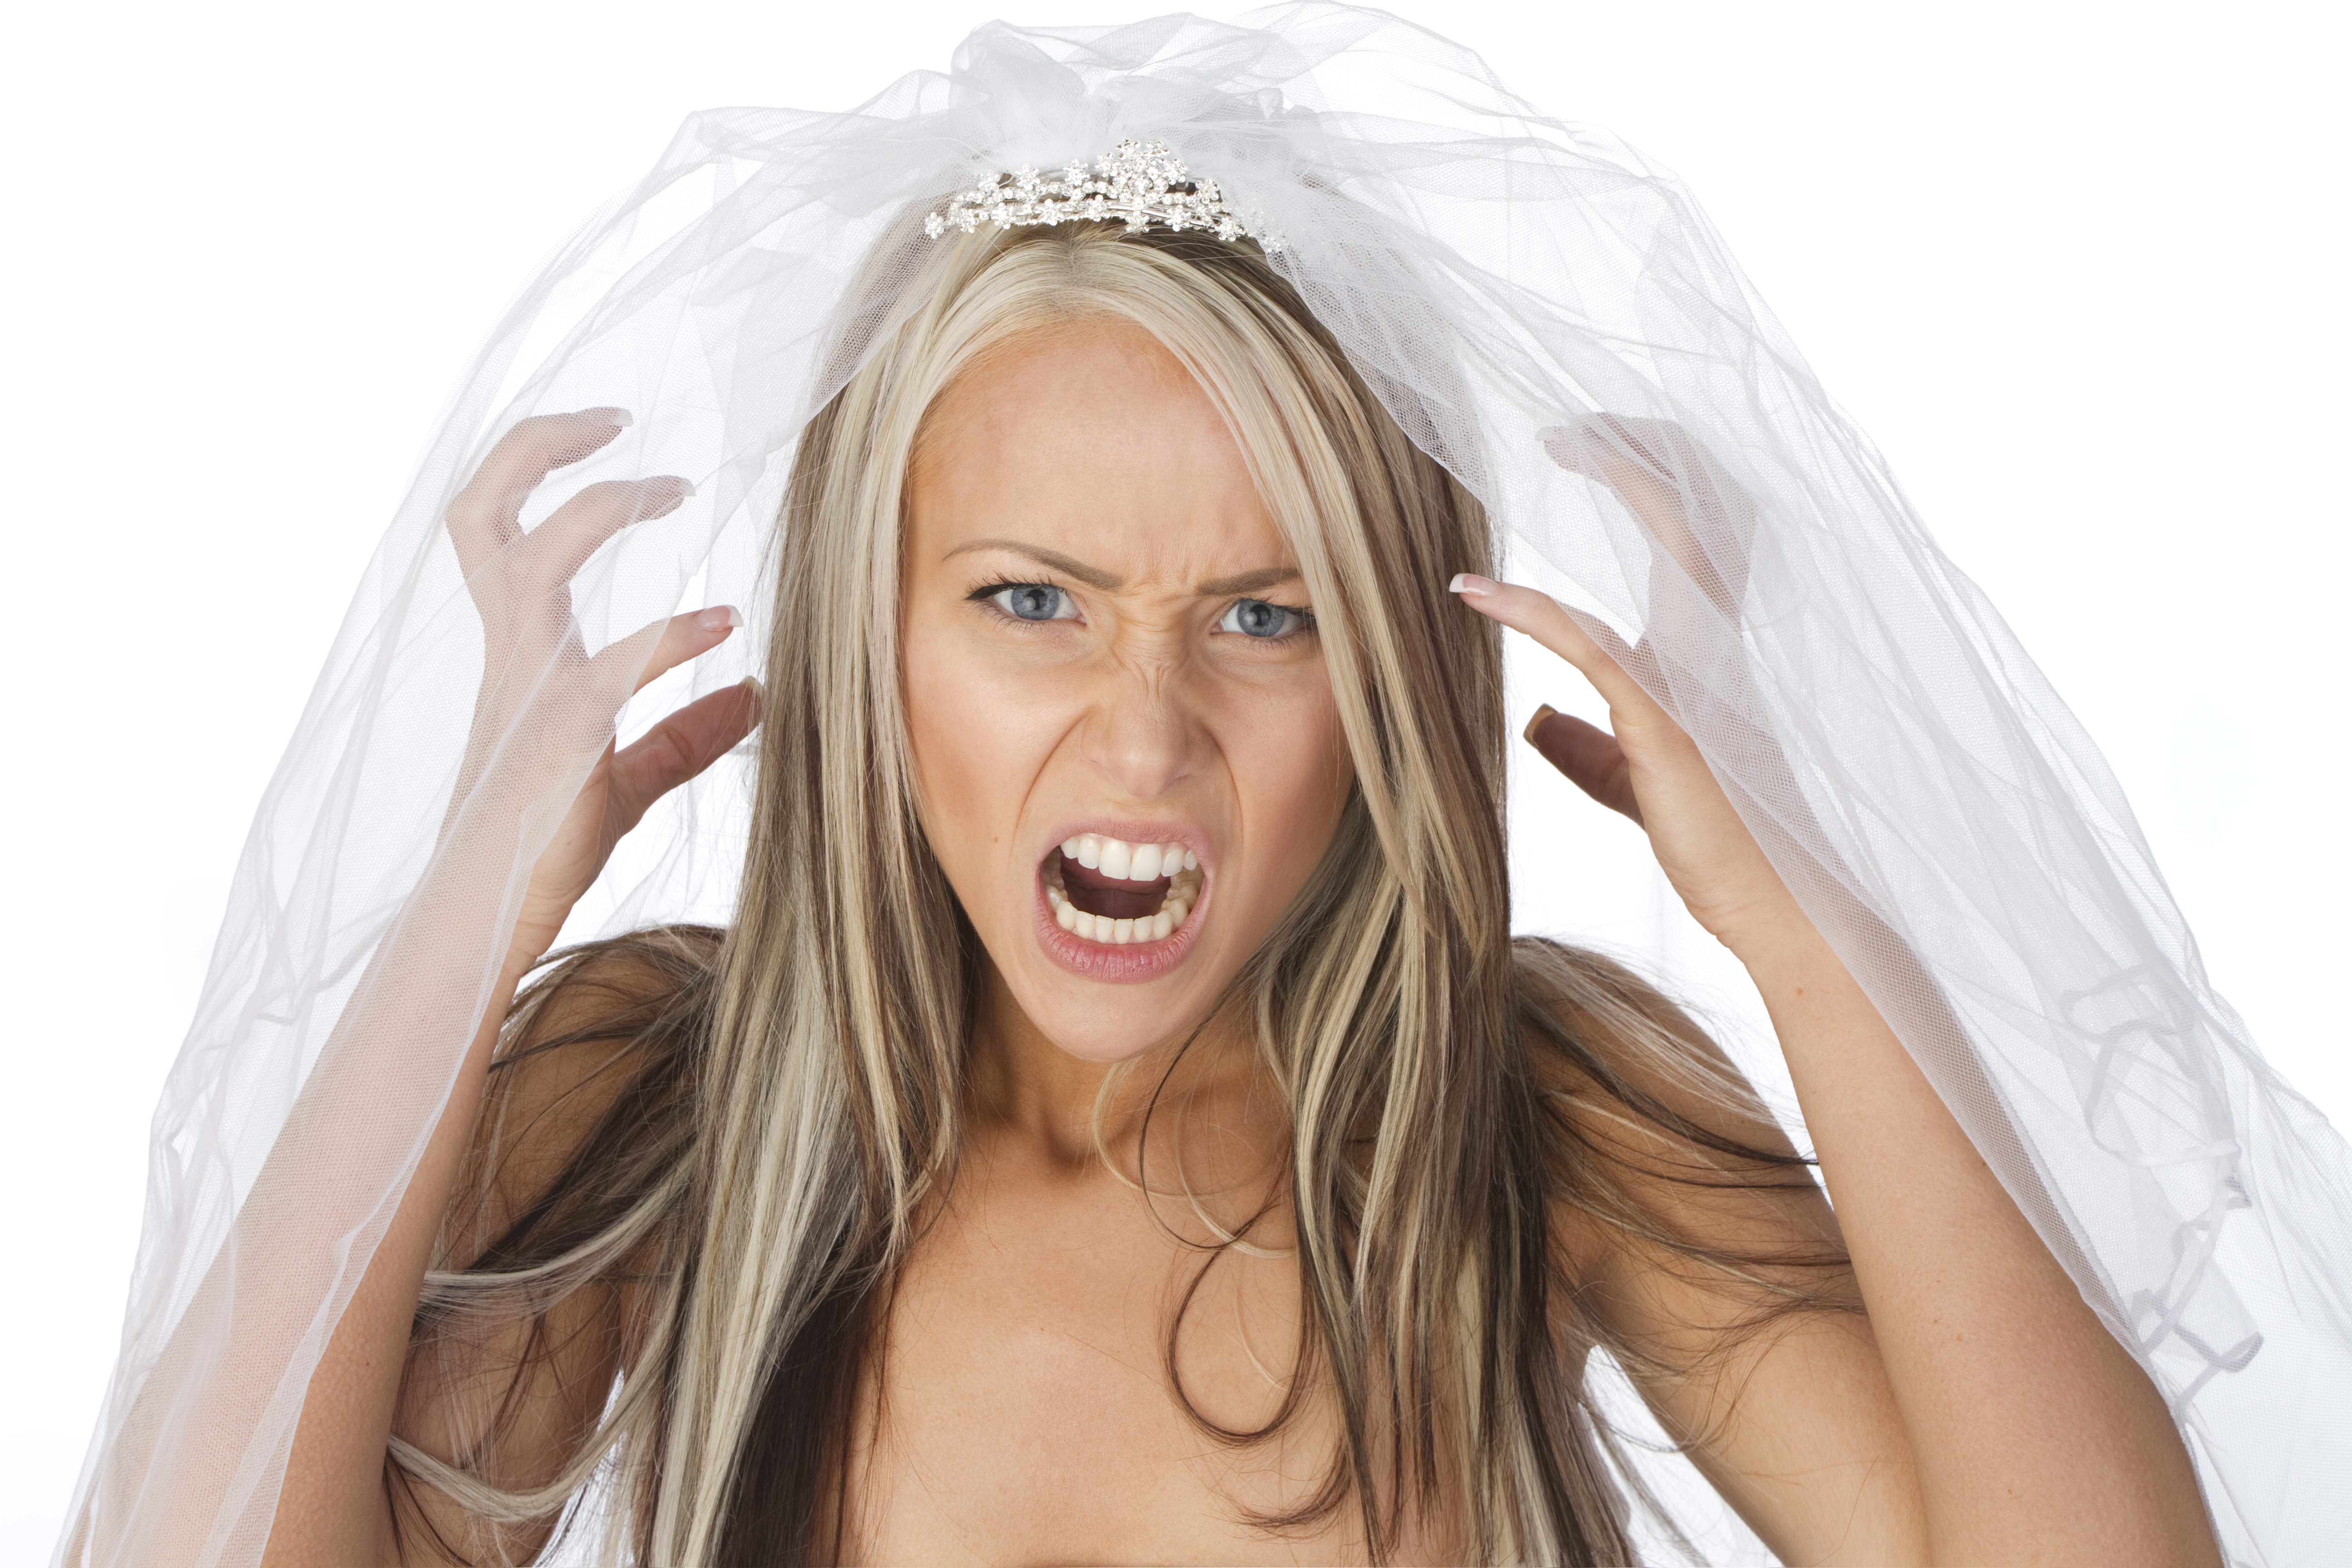 An angry bride | Source: Getty Images